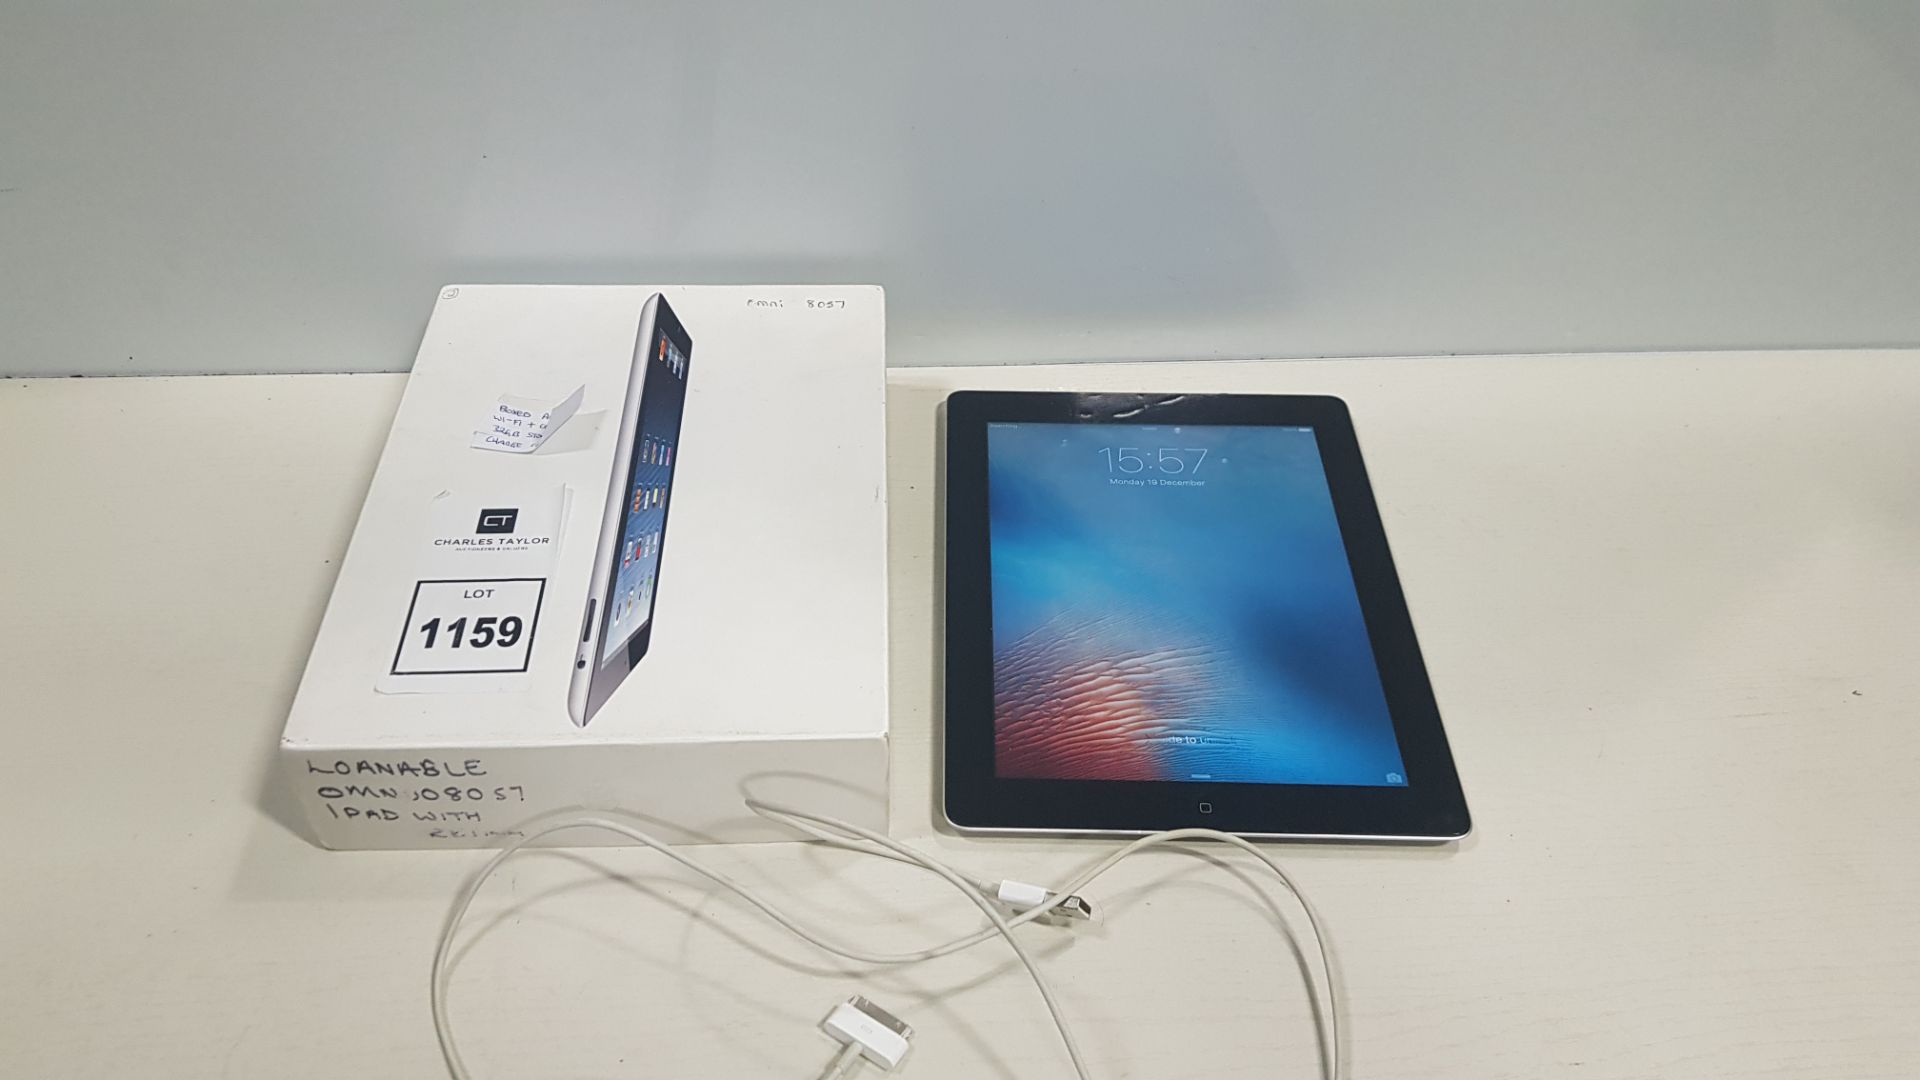 1 X BOXED APPLE IPAD 32 GB WIFI + CELLULAR WITH CHARGE CABLE